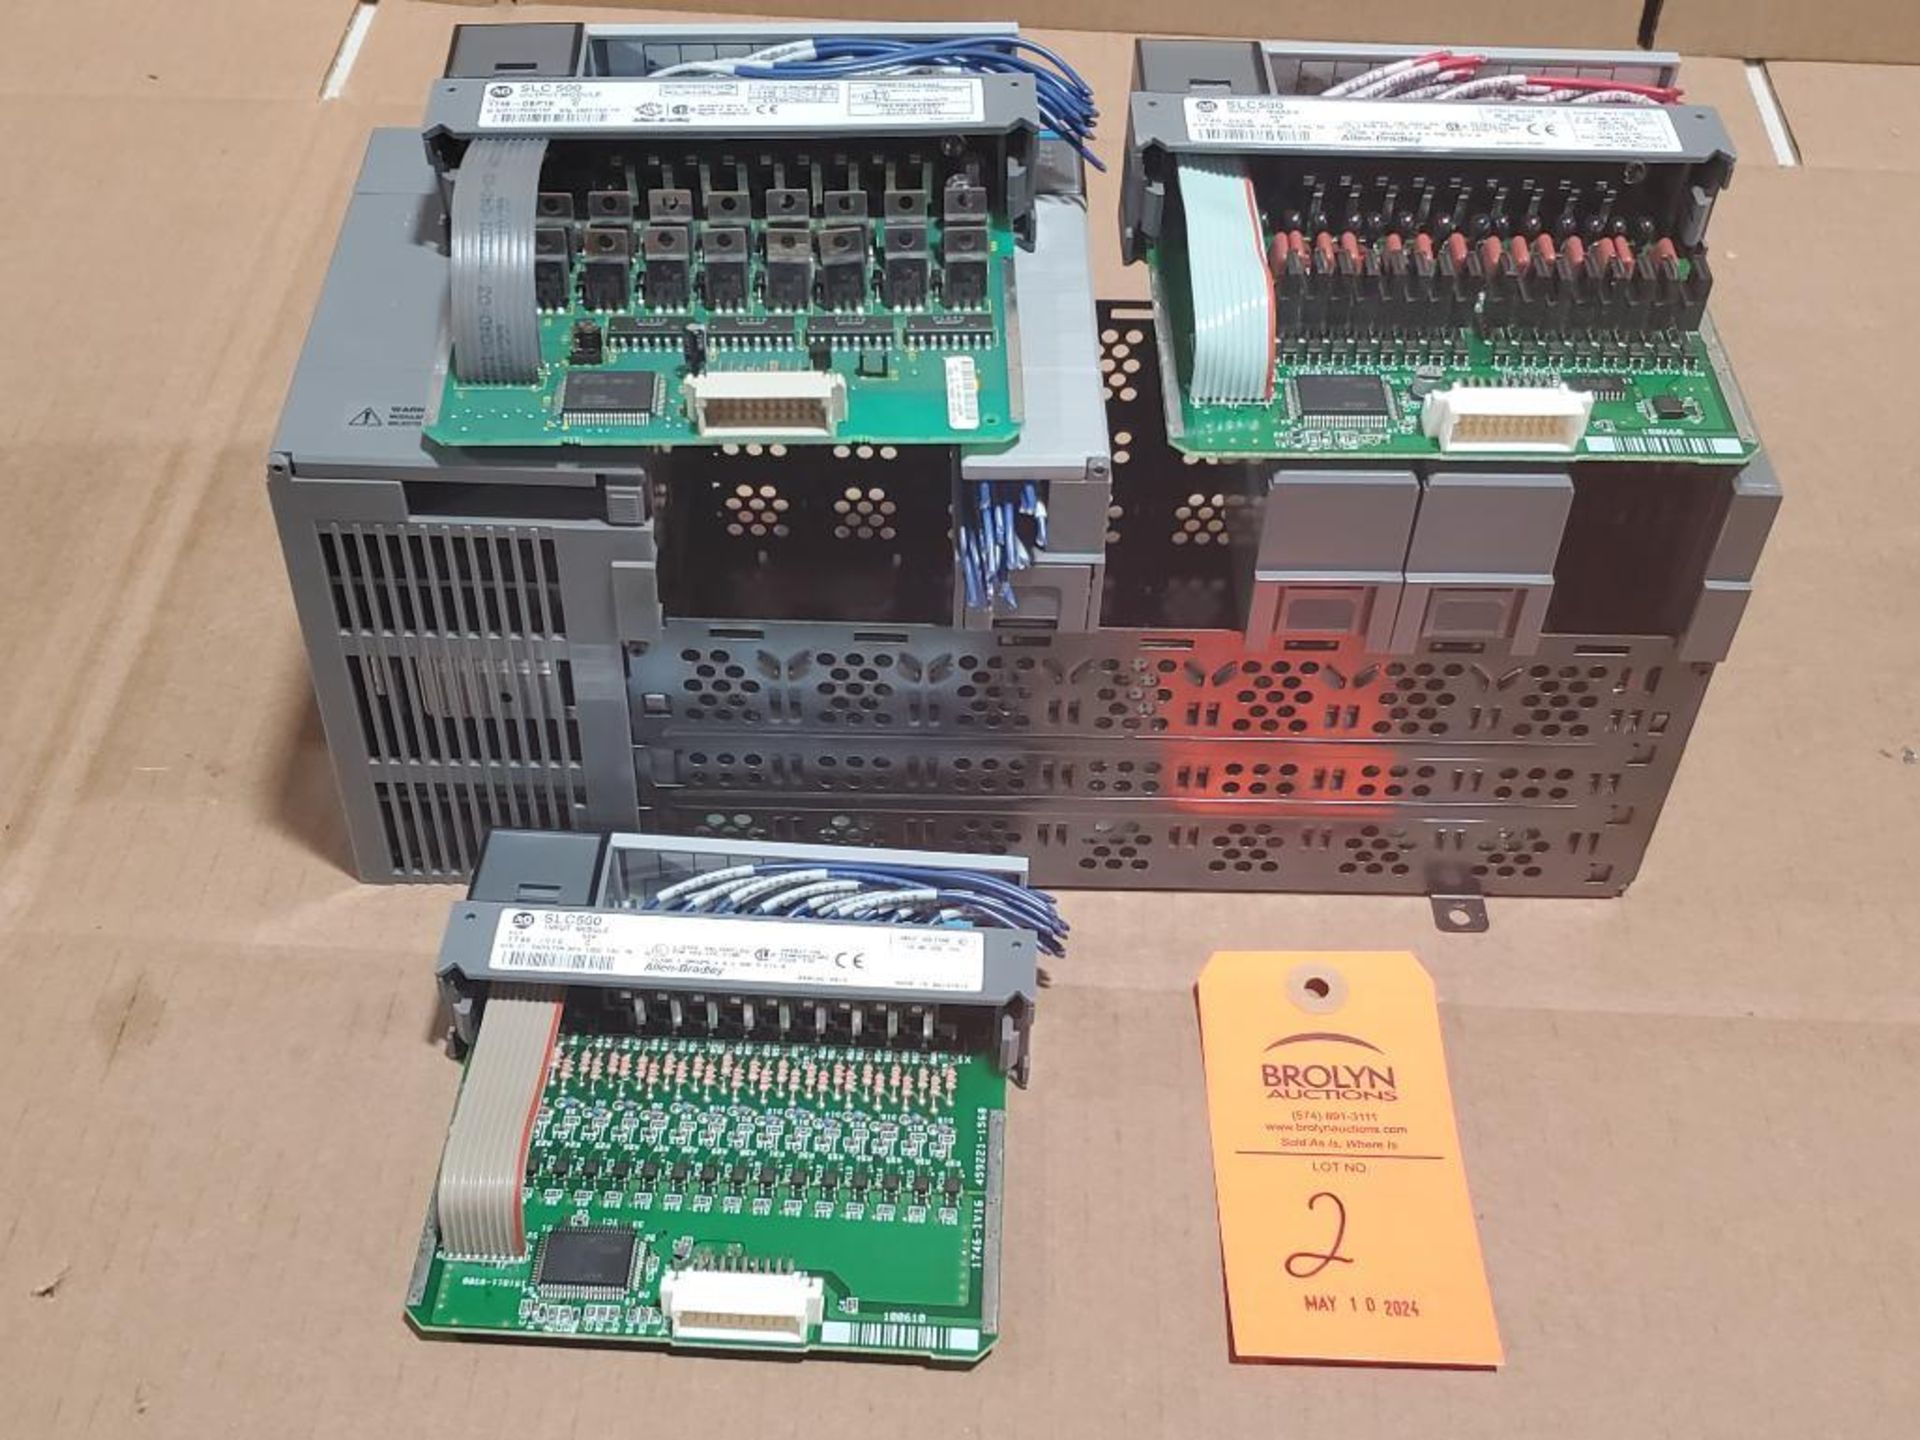 Allen Bradley SLC500 7-slot programmable controller rack with input/output cards. - Image 9 of 9